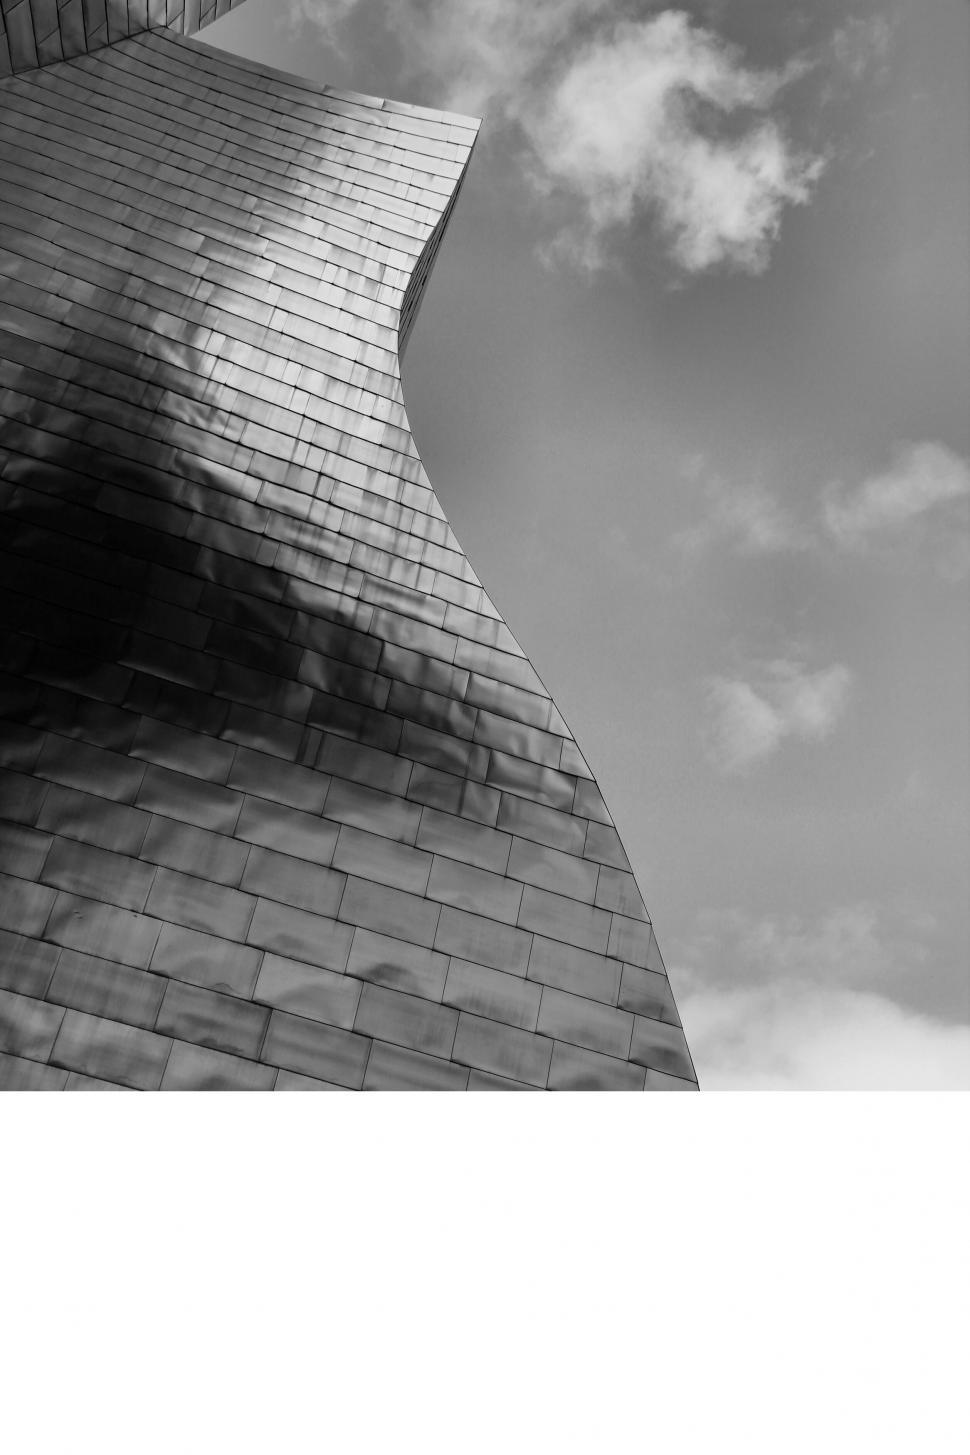 Free Image of Curved Metal Architecture with Cloudy Sky in Background 